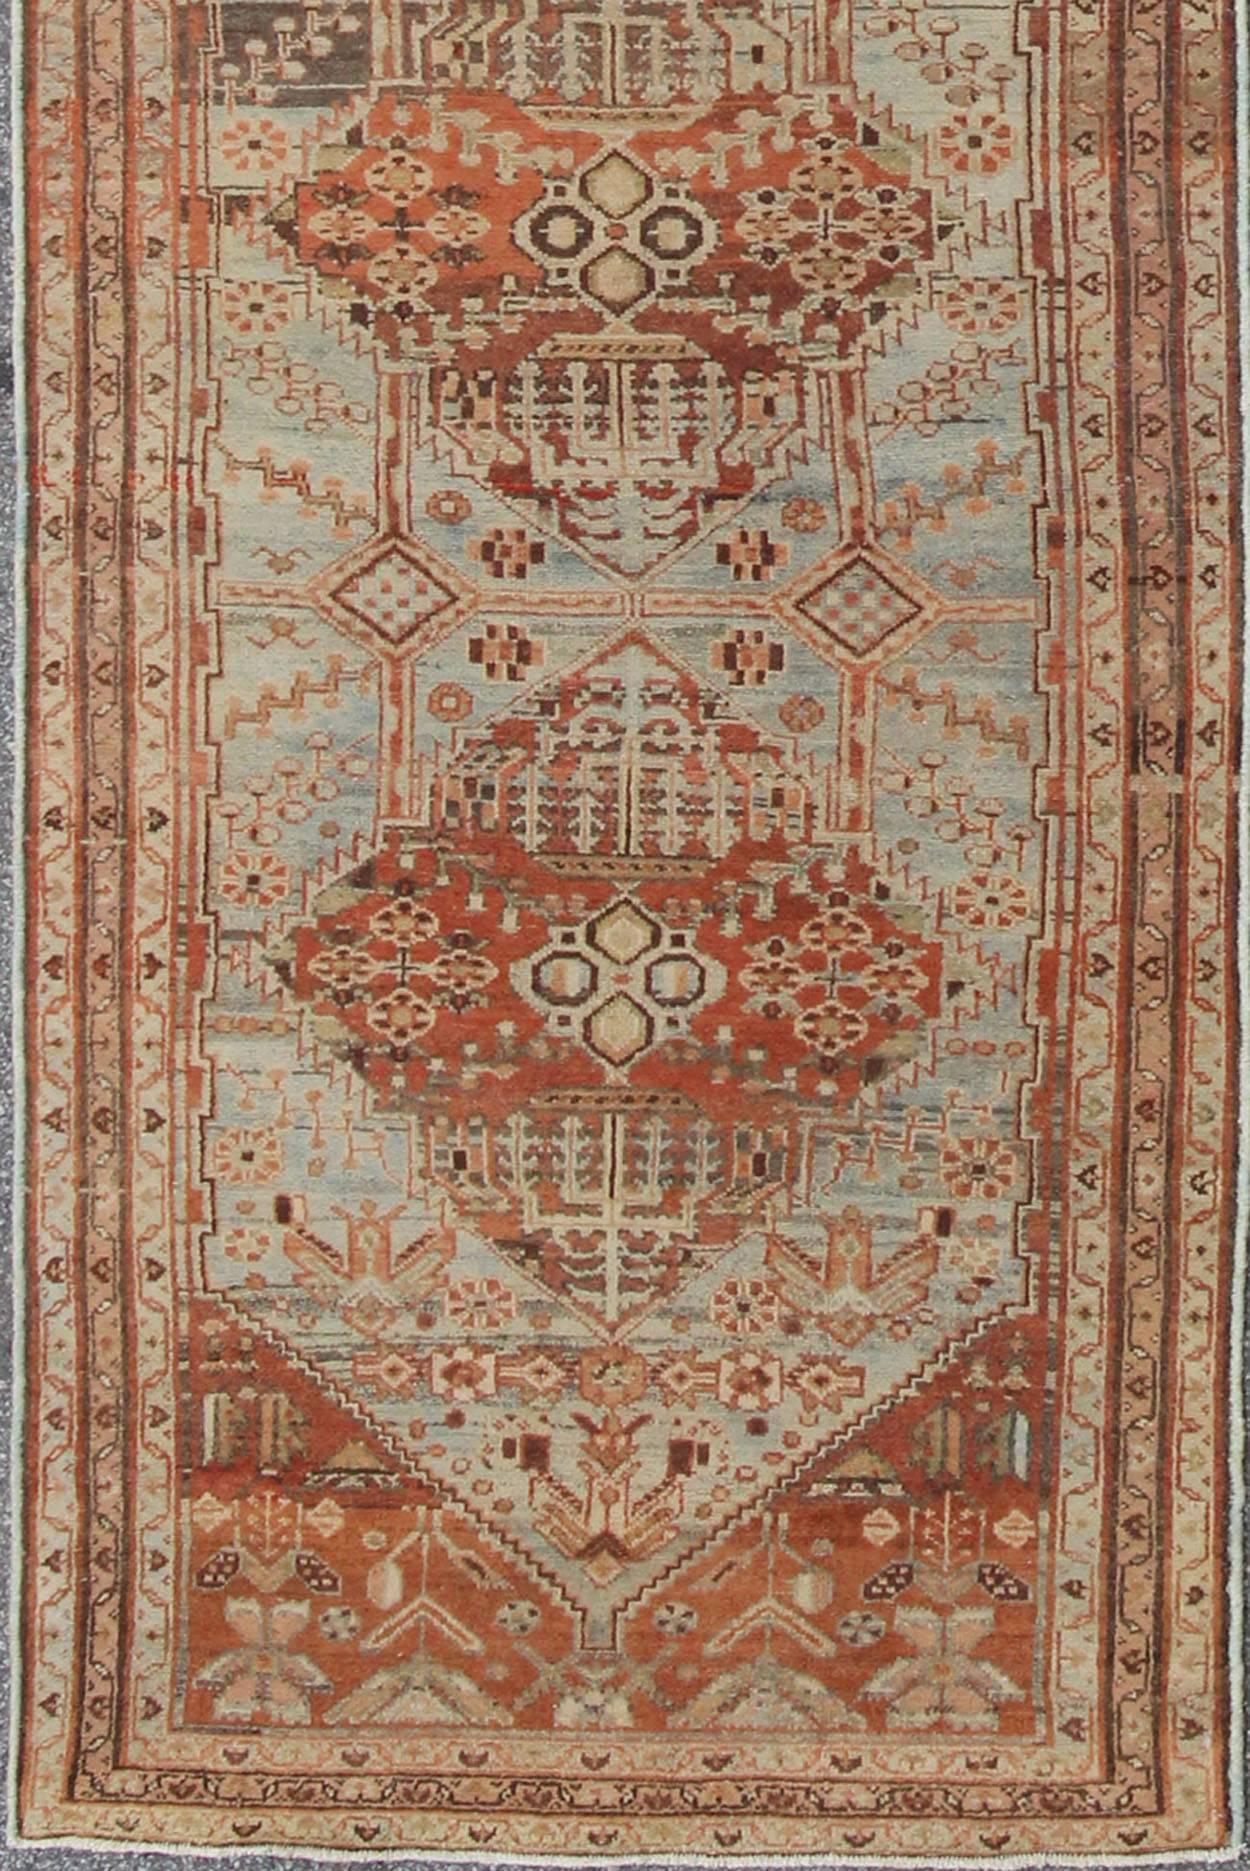 This magnificent antique Persian Malayer carpet, of an impressive size, bears a beautiful, all-over Sub-geometric design paired with a delightful palette of burnt orange, various blues and a very light peach. The central field is filled with a